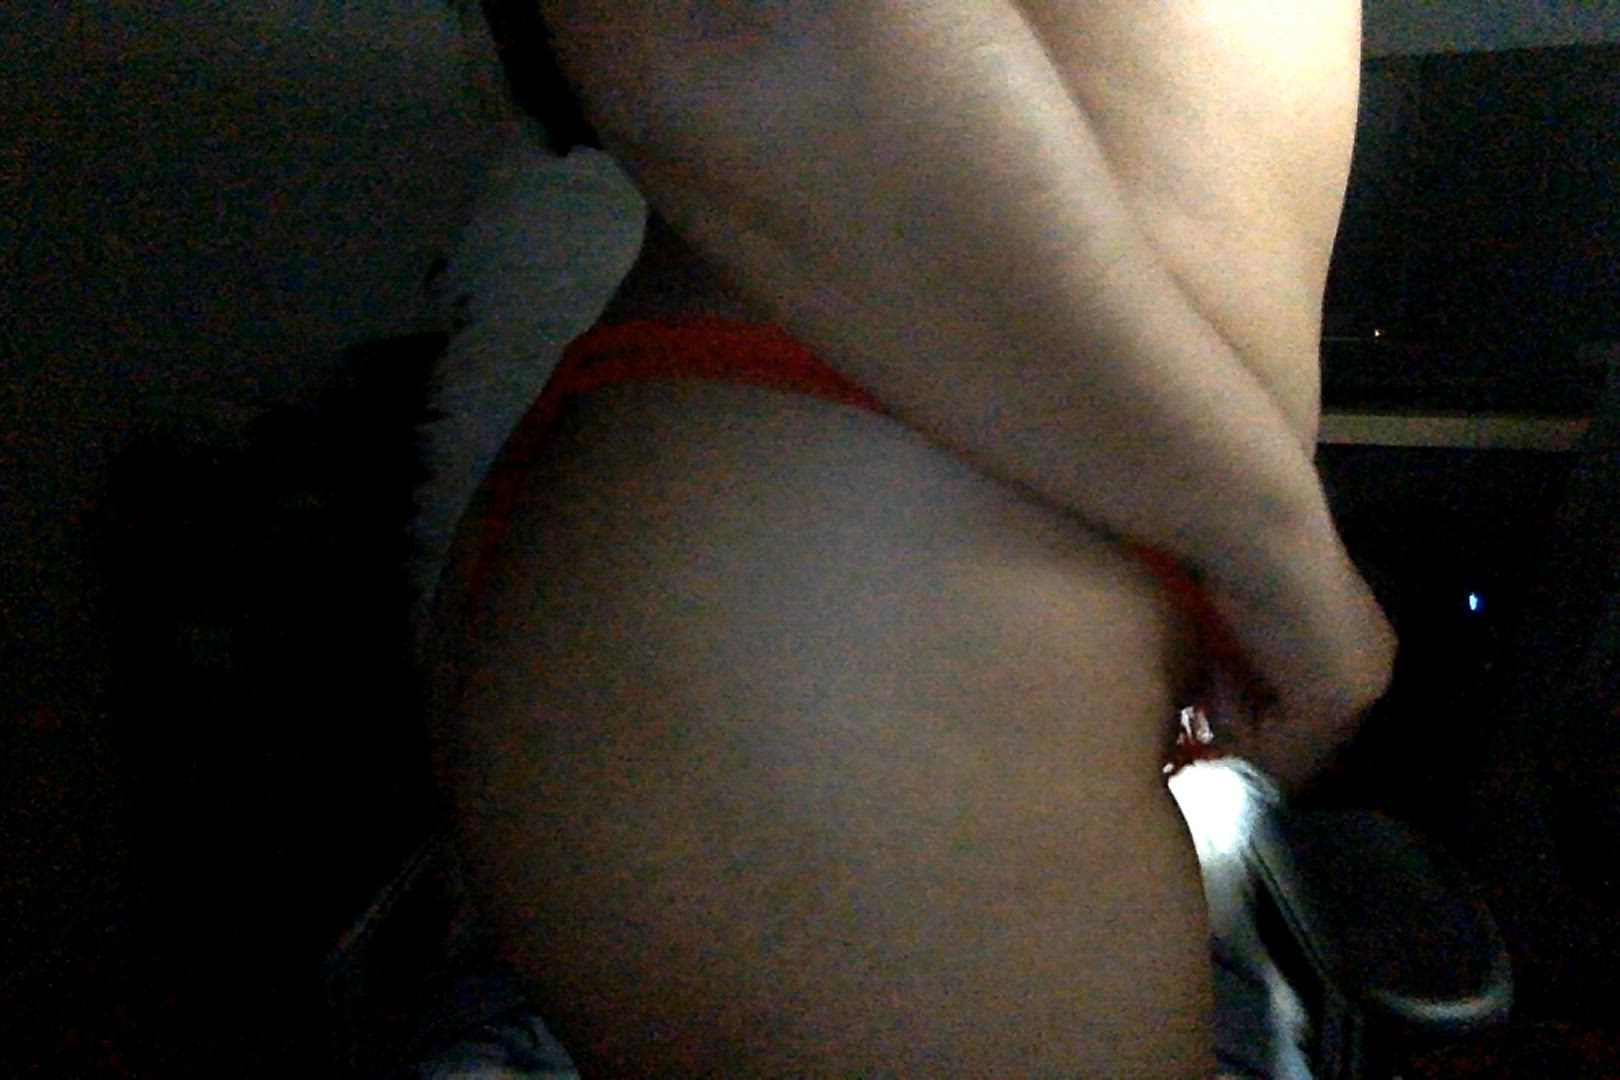 Ass porn video with onlyfans model yesgoddessnova <strong>@yesgoddessnova</strong>